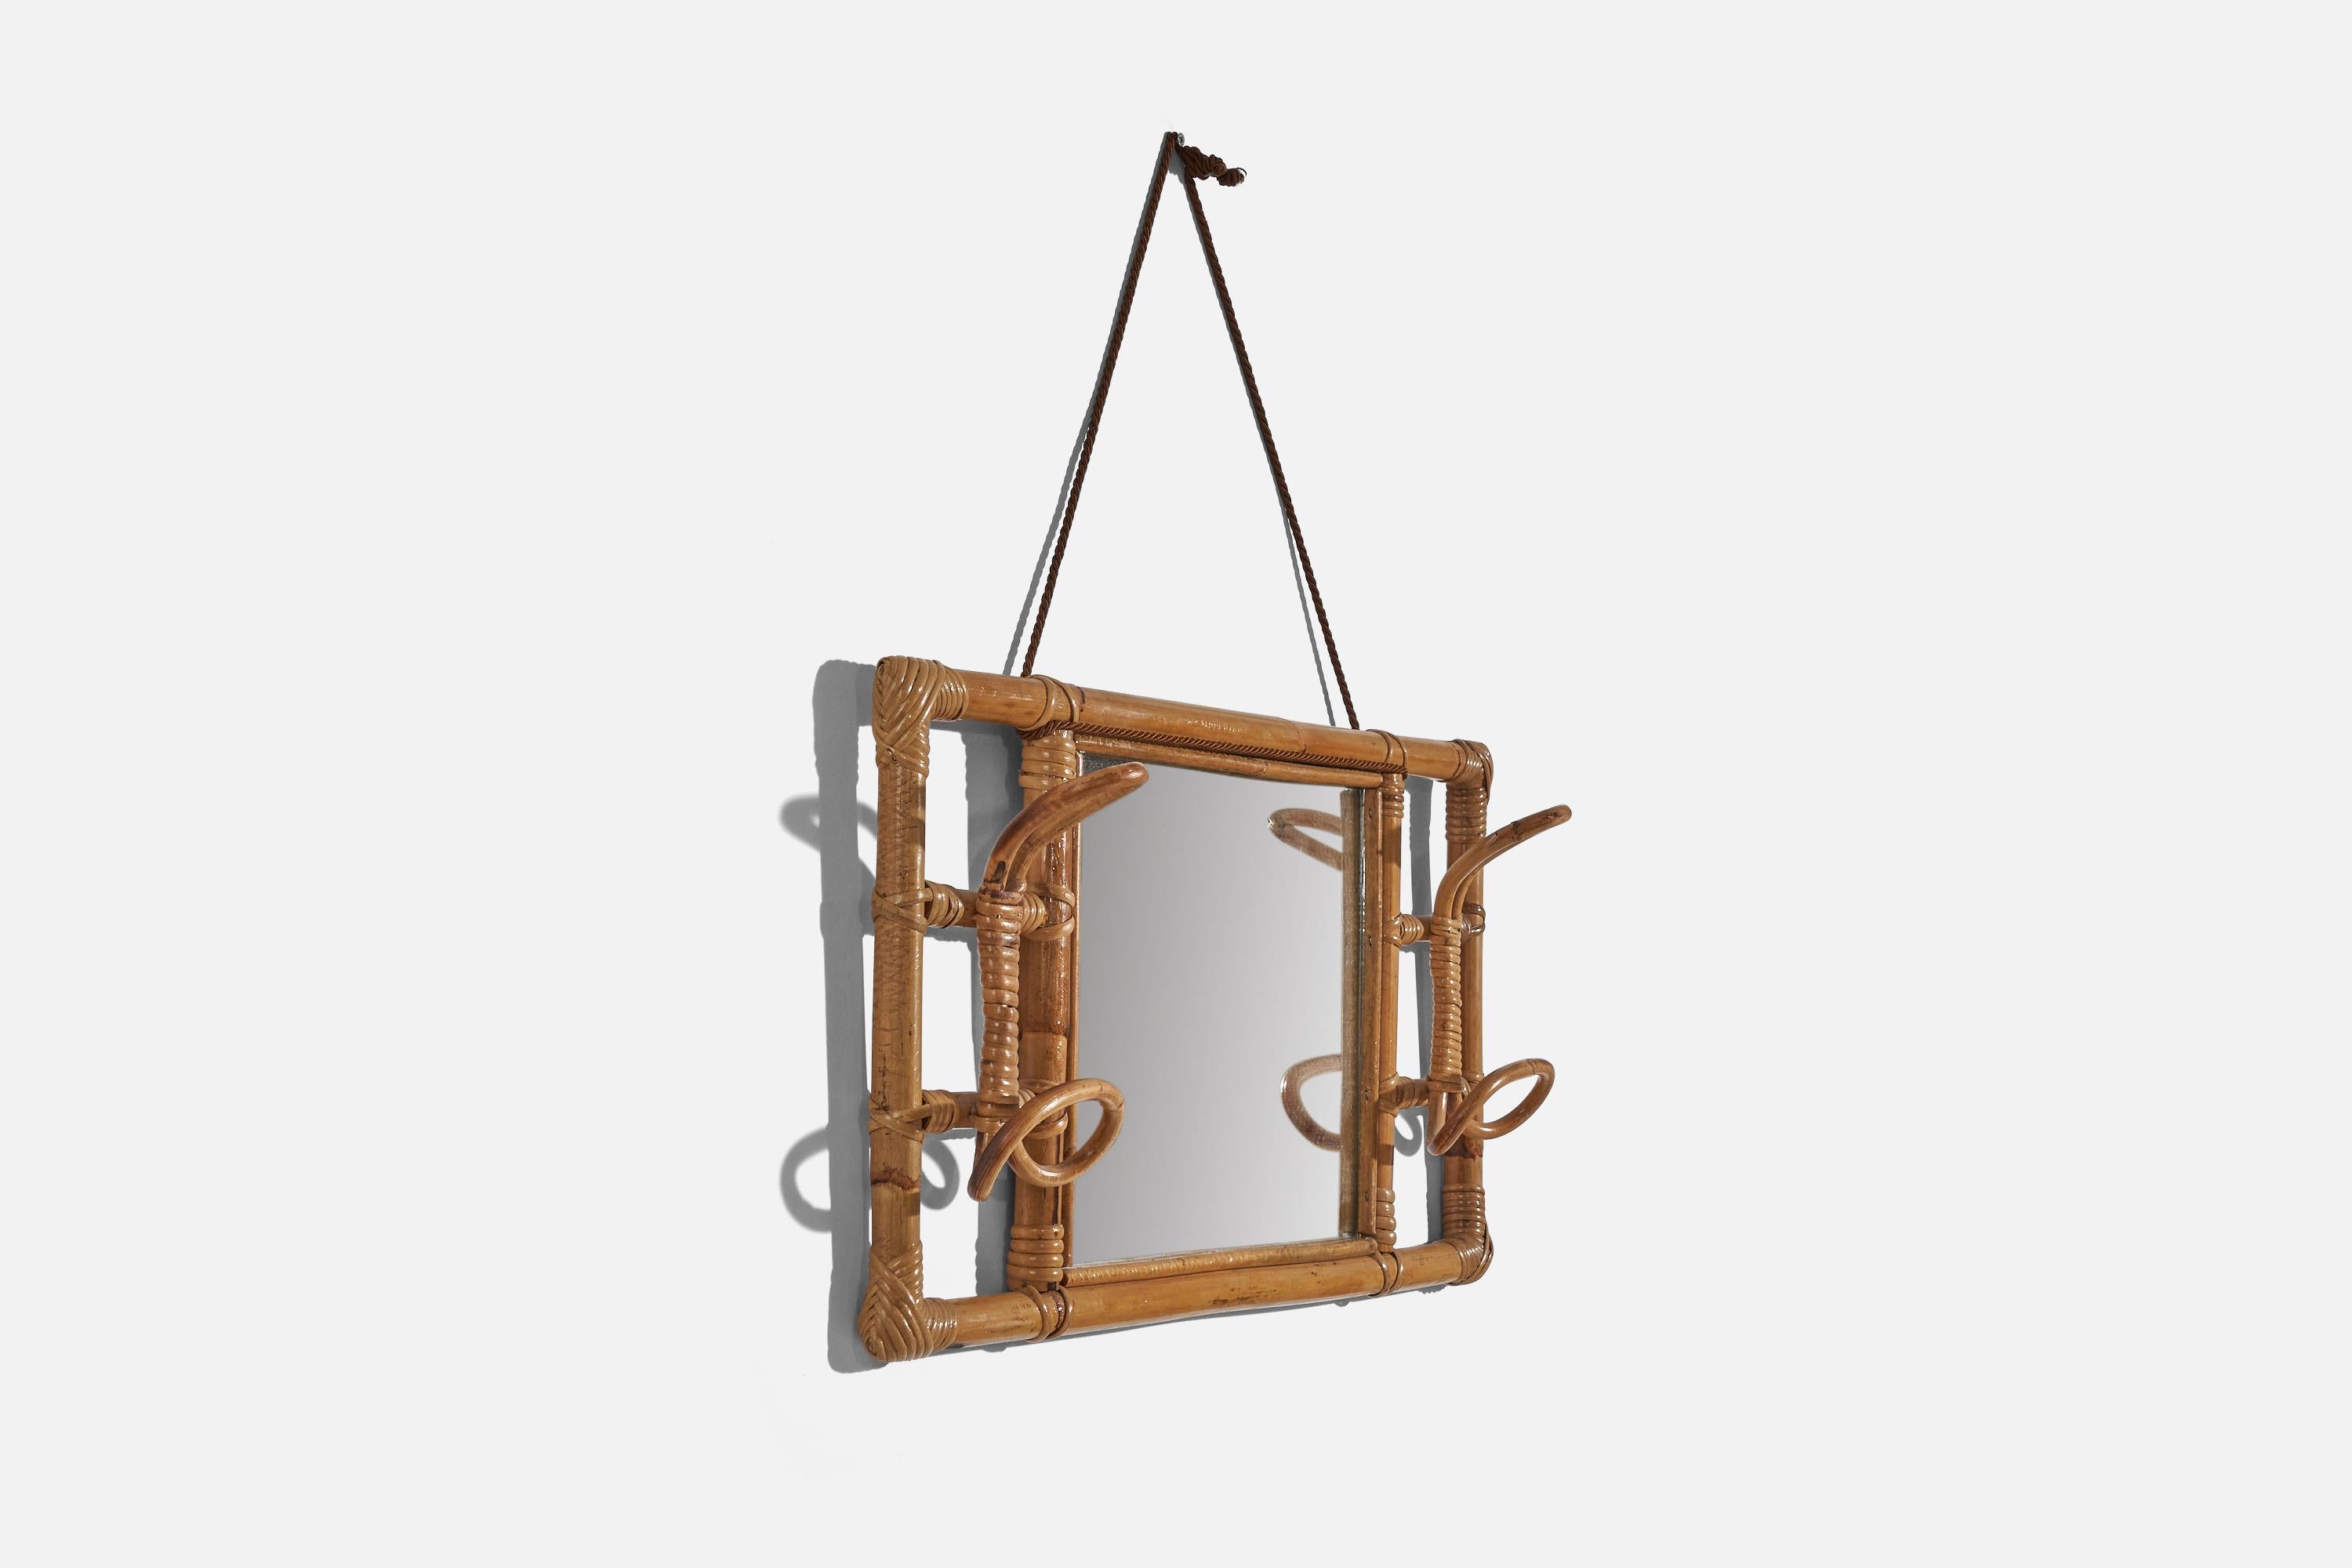 Italian Designer, Wall Coat Rack with Mirror, Rattan, Bamboo, Italy, c. 1950s For Sale 1